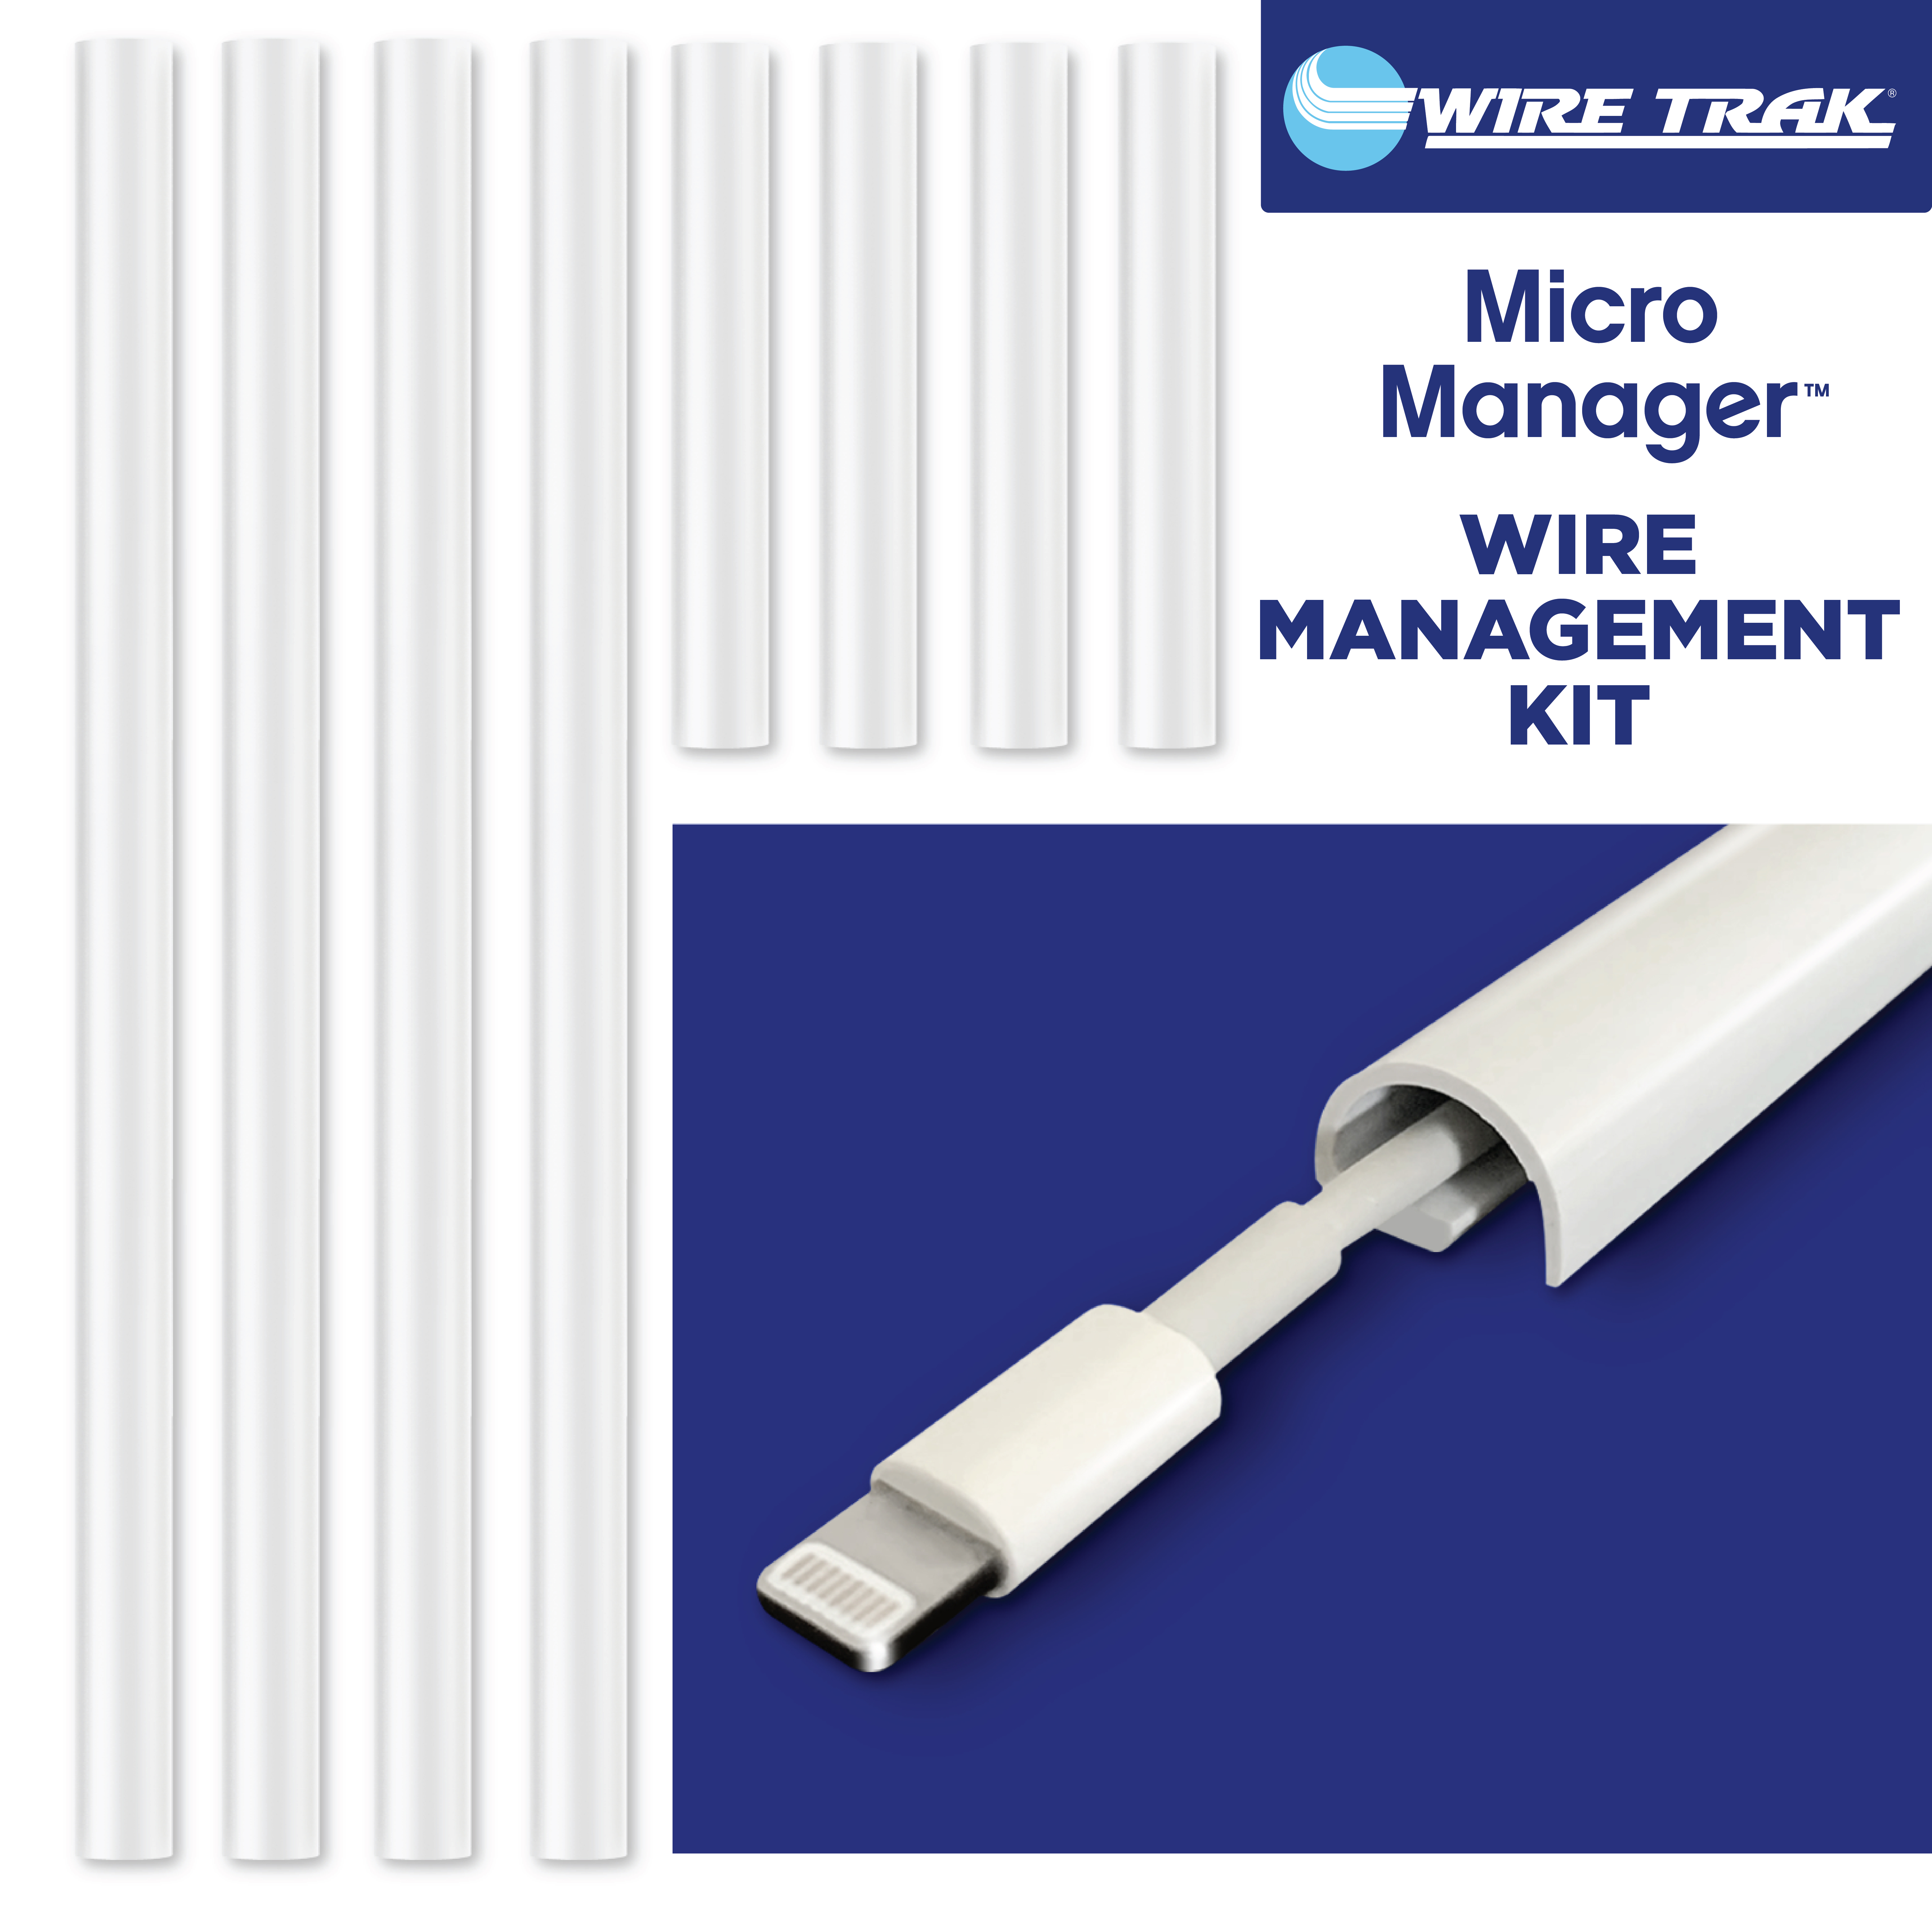 Micro Manager Kit – Wire Trak